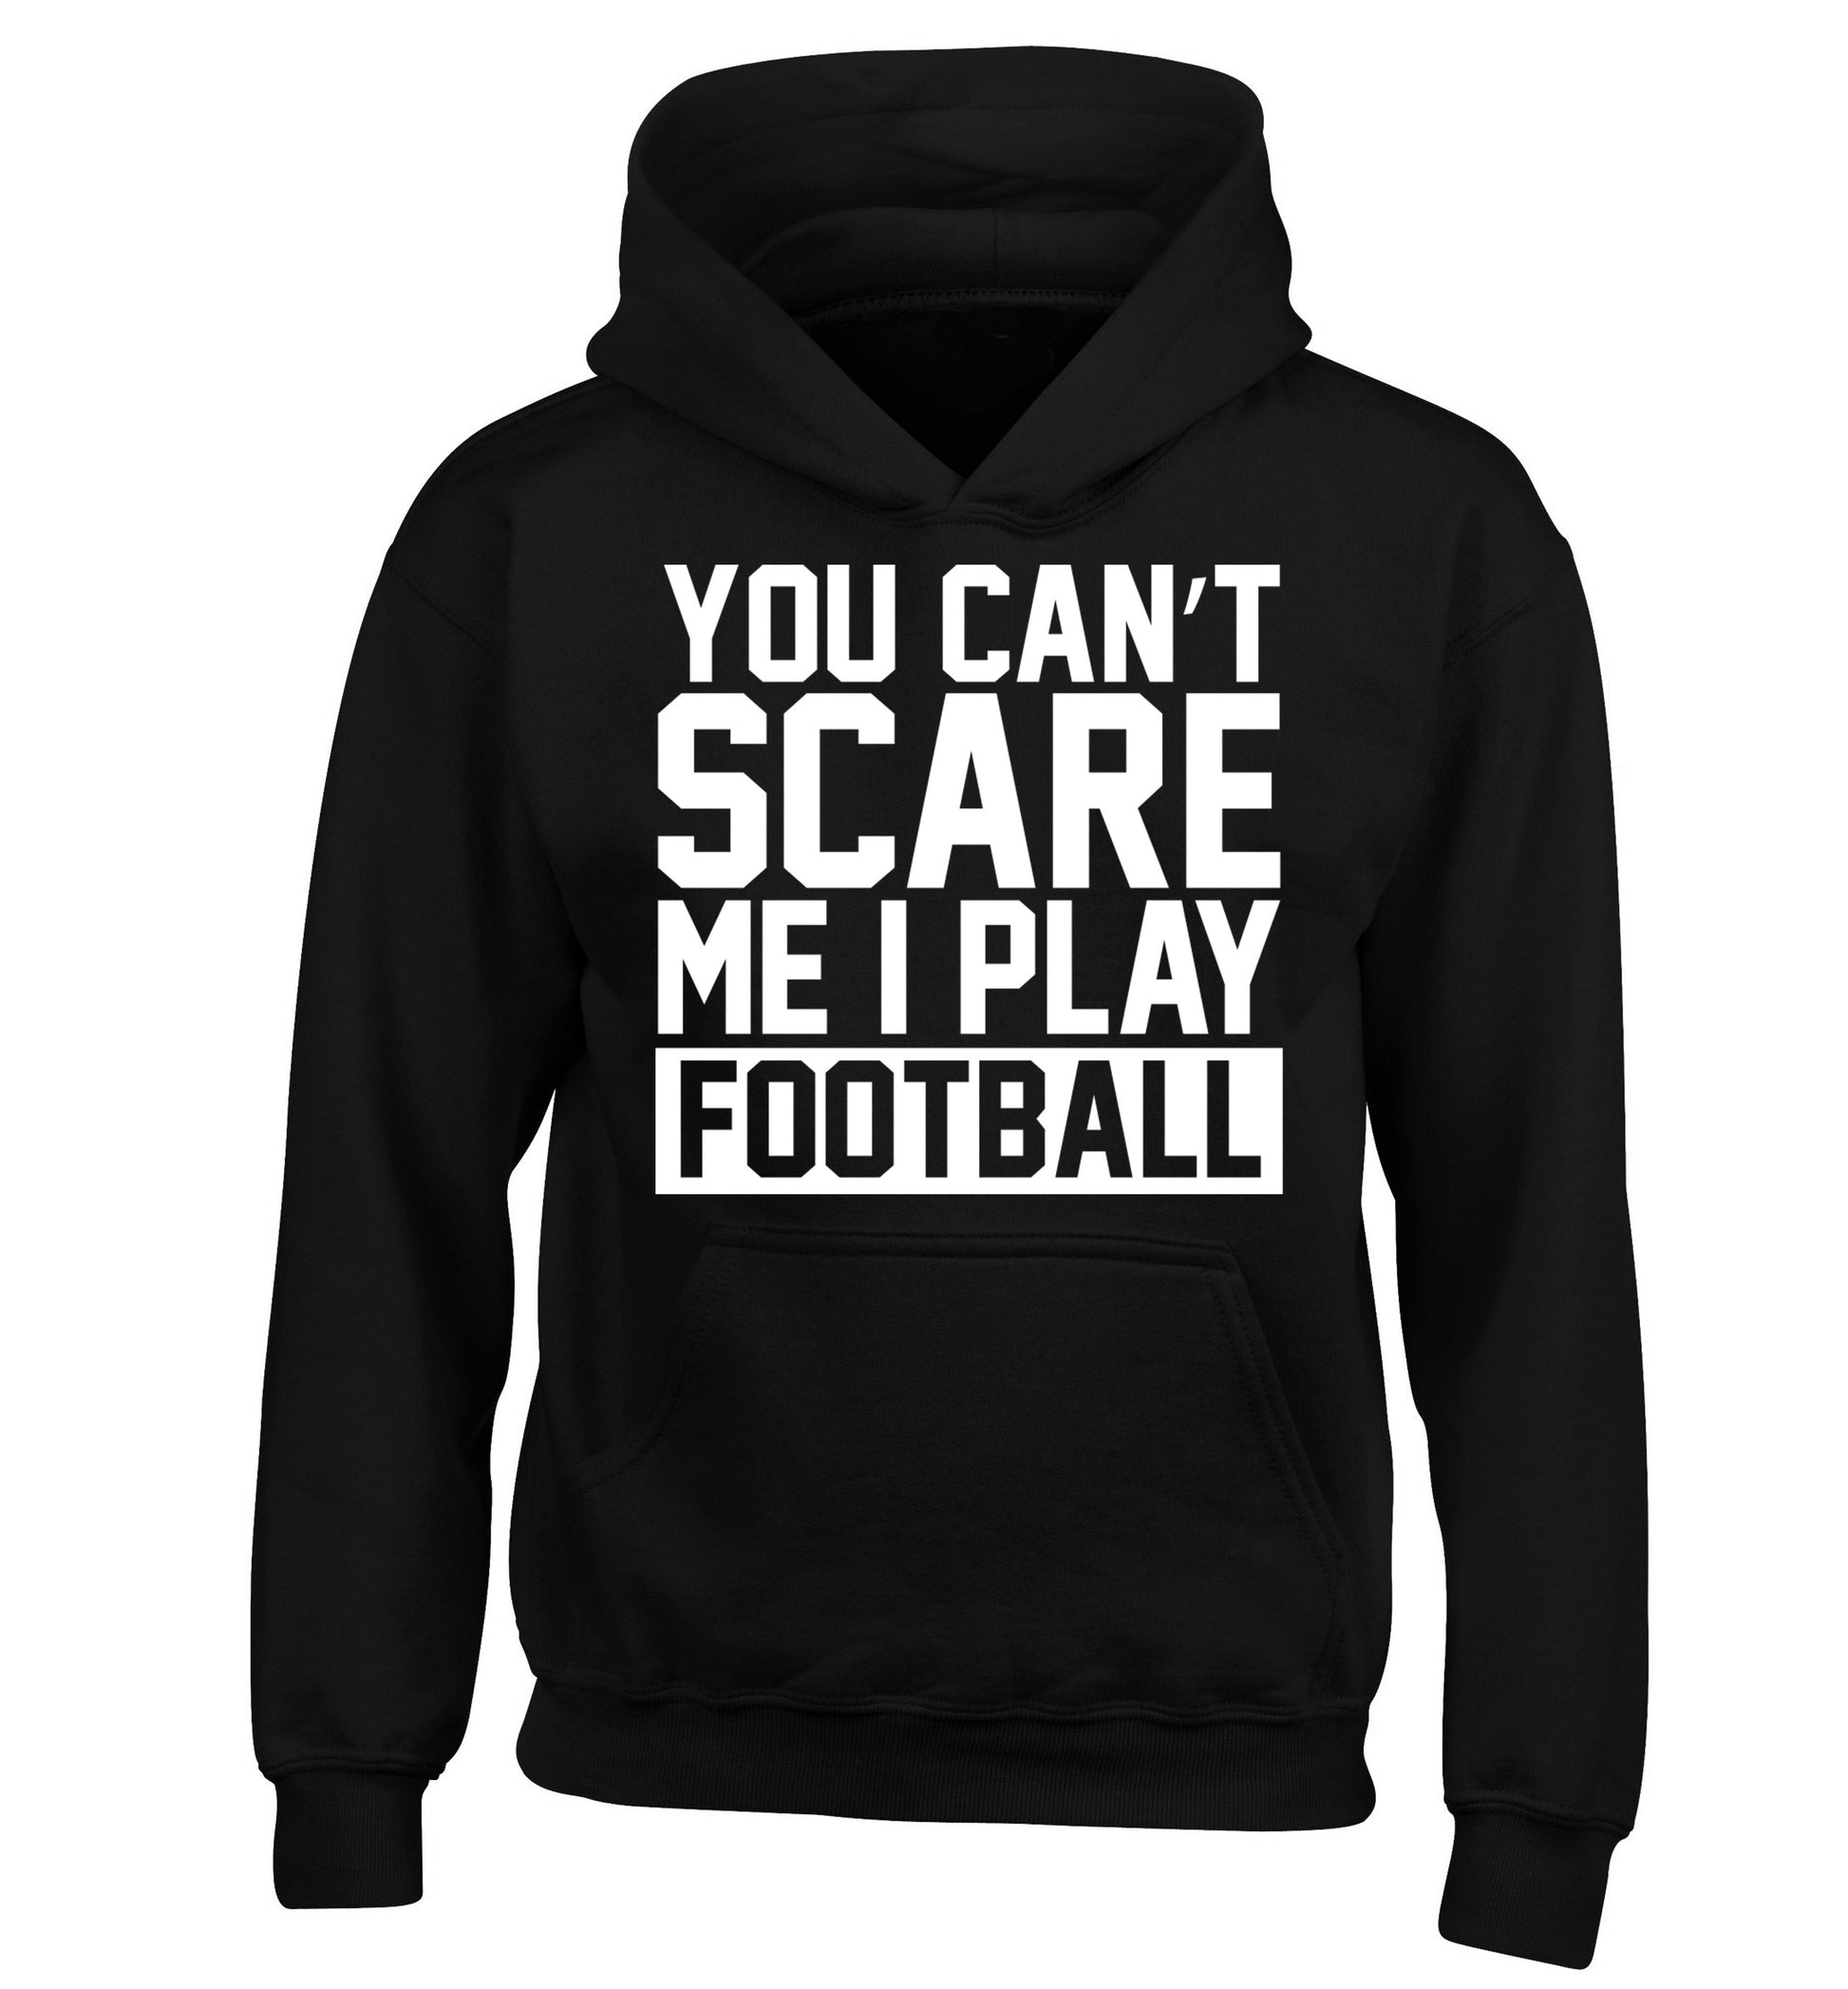 You can't scare me I play football children's black hoodie 12-14 Years